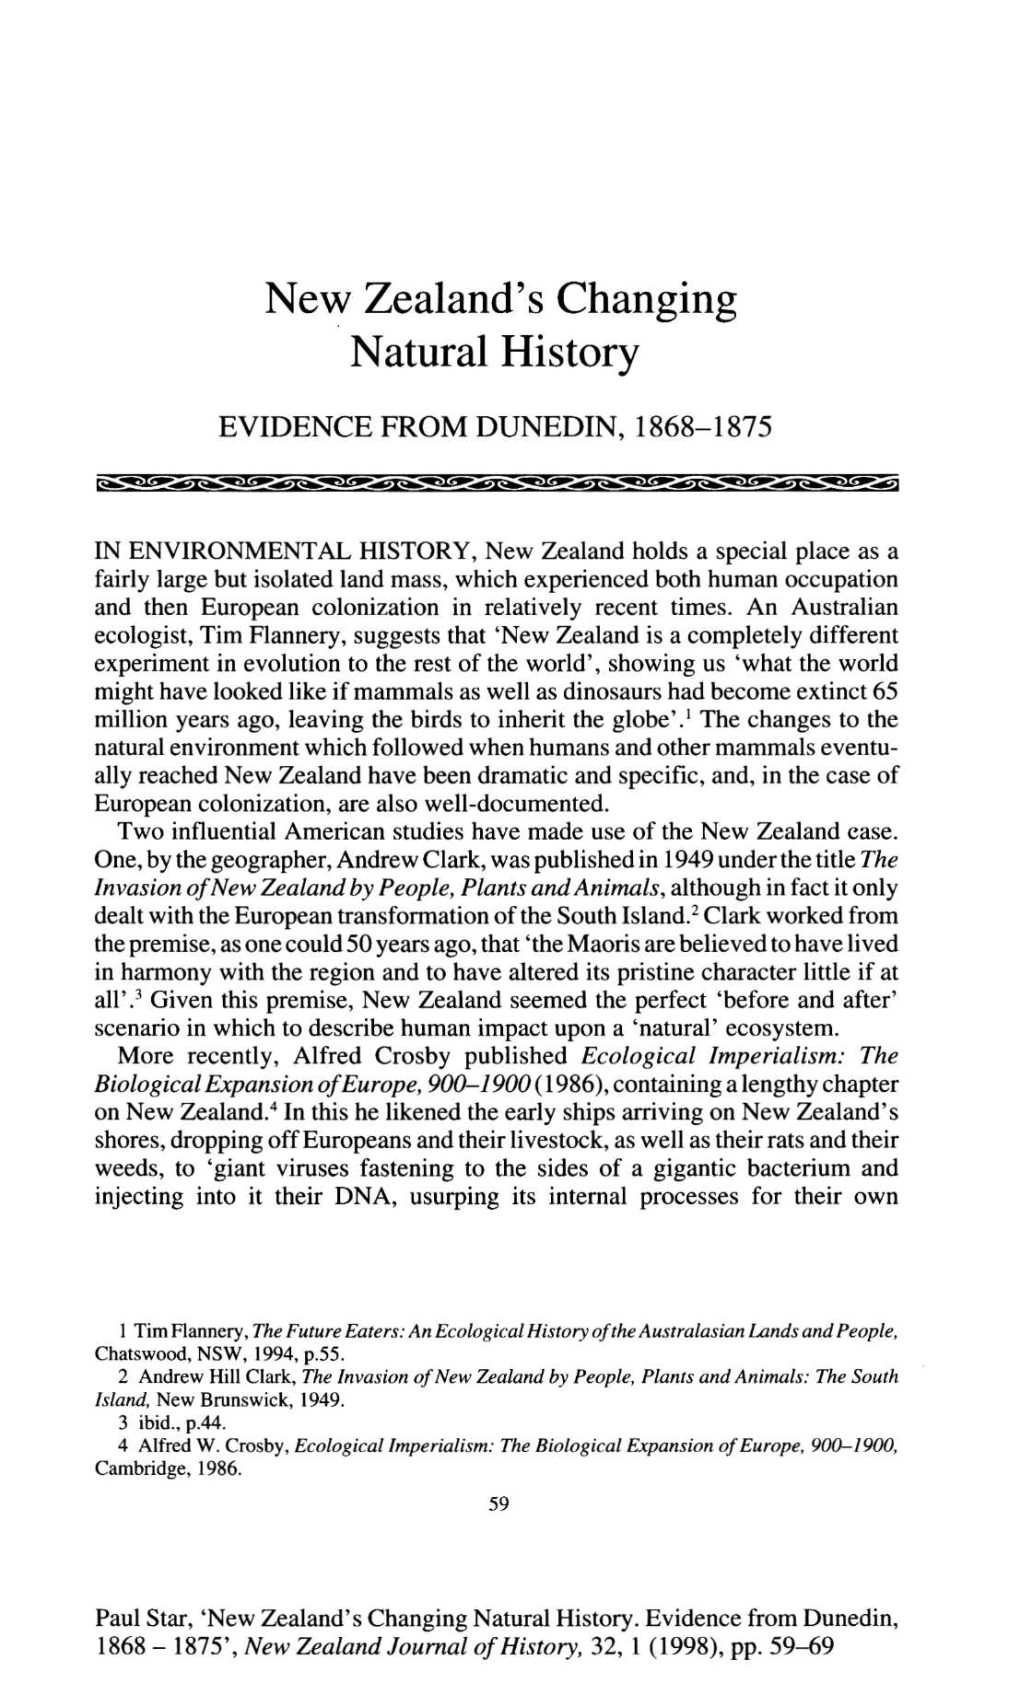 Paul Star, 'New Zealand's Changing Natural History. Evidence from Dunedin, 1868 - 1875', New Zealand Journal of History, 32, 1 (1998), Pp